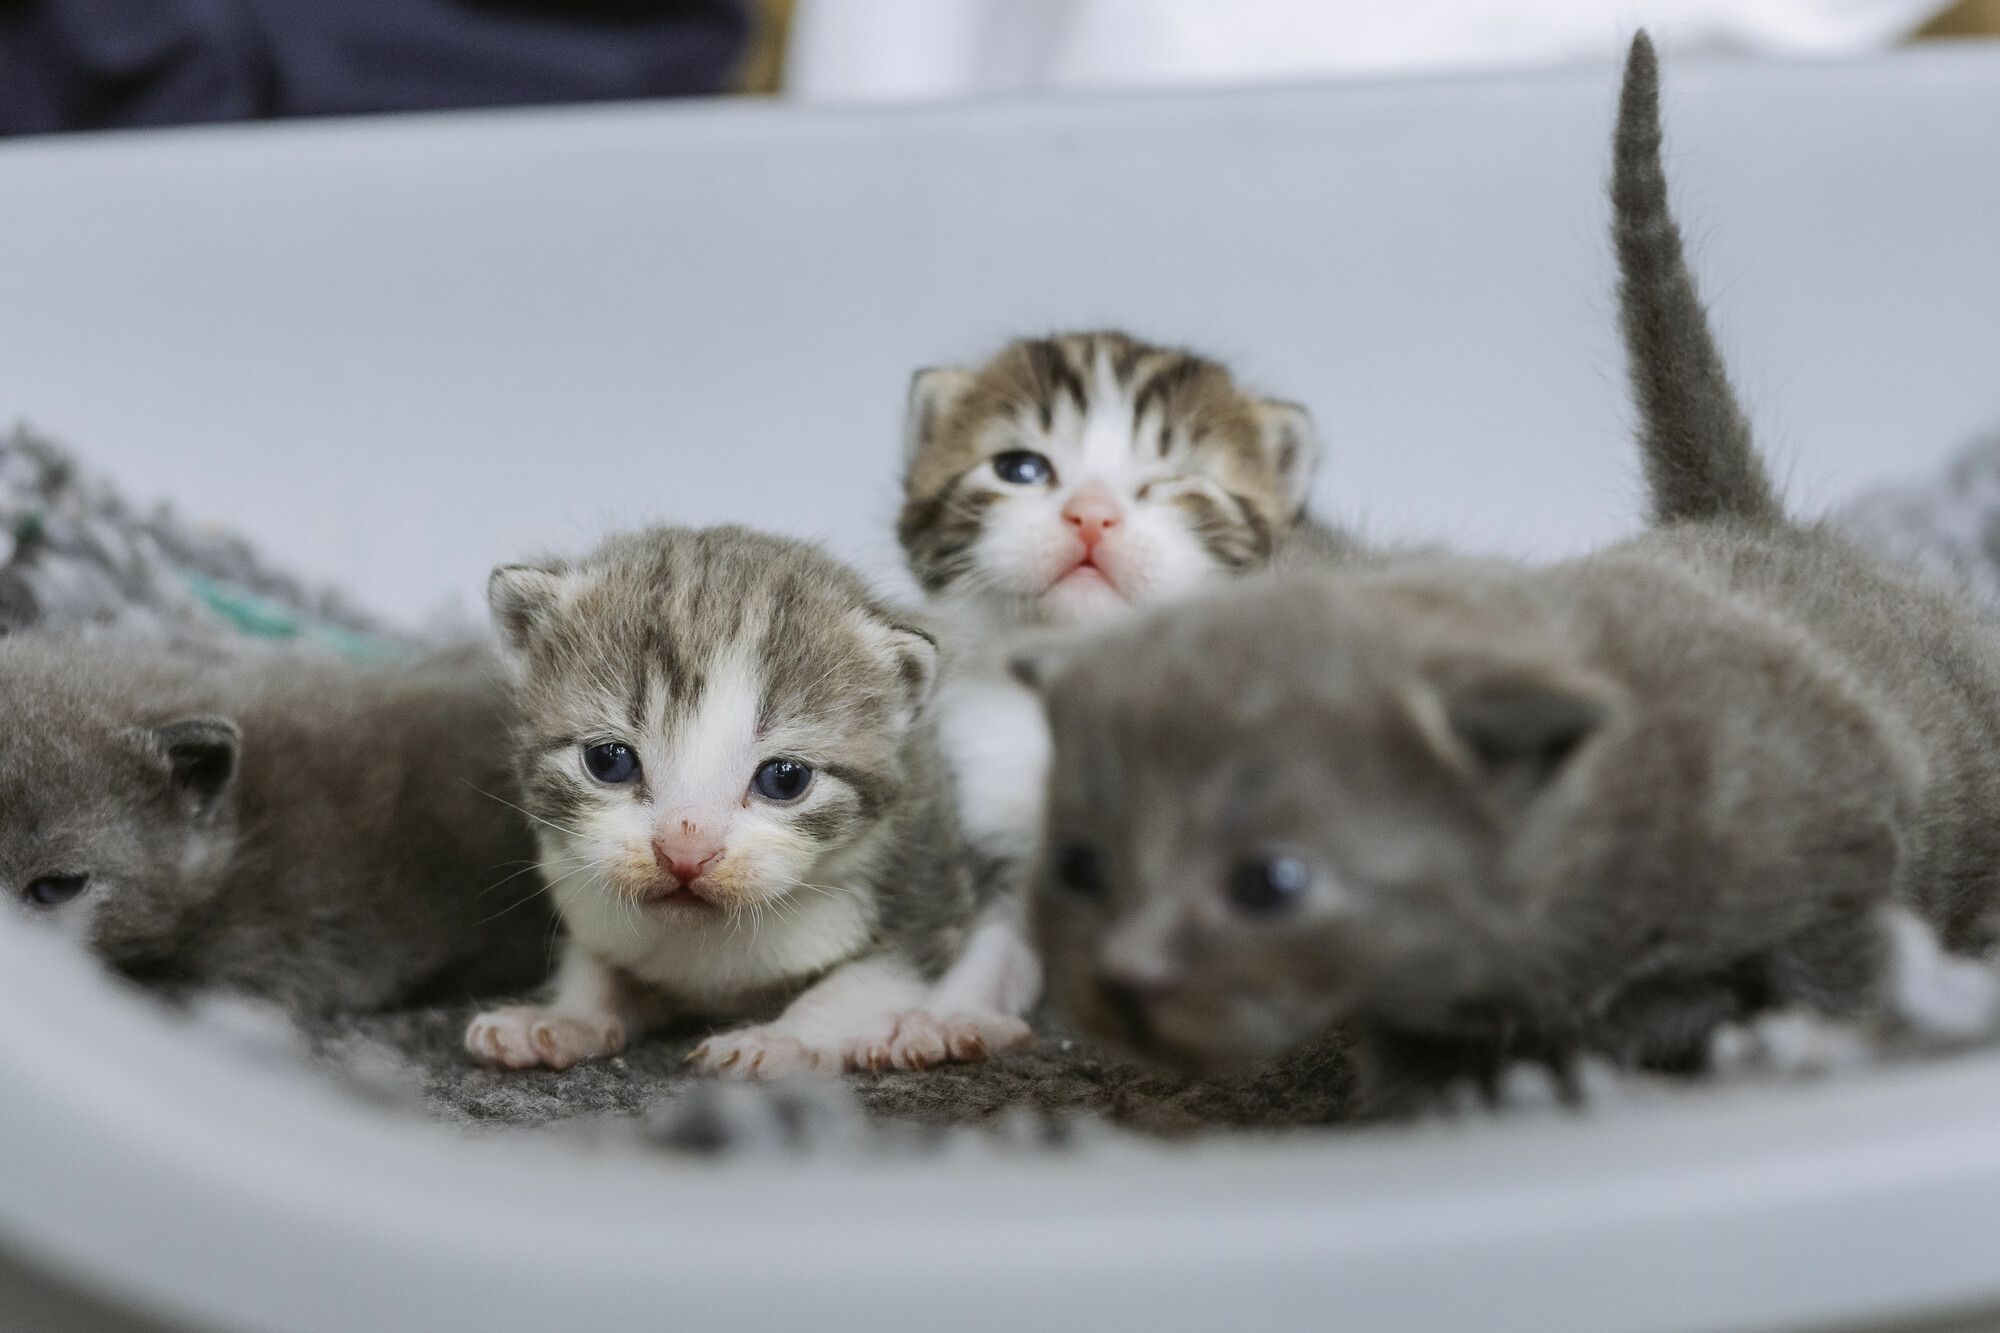 Two tabby kittens and two grey kittens in a bed